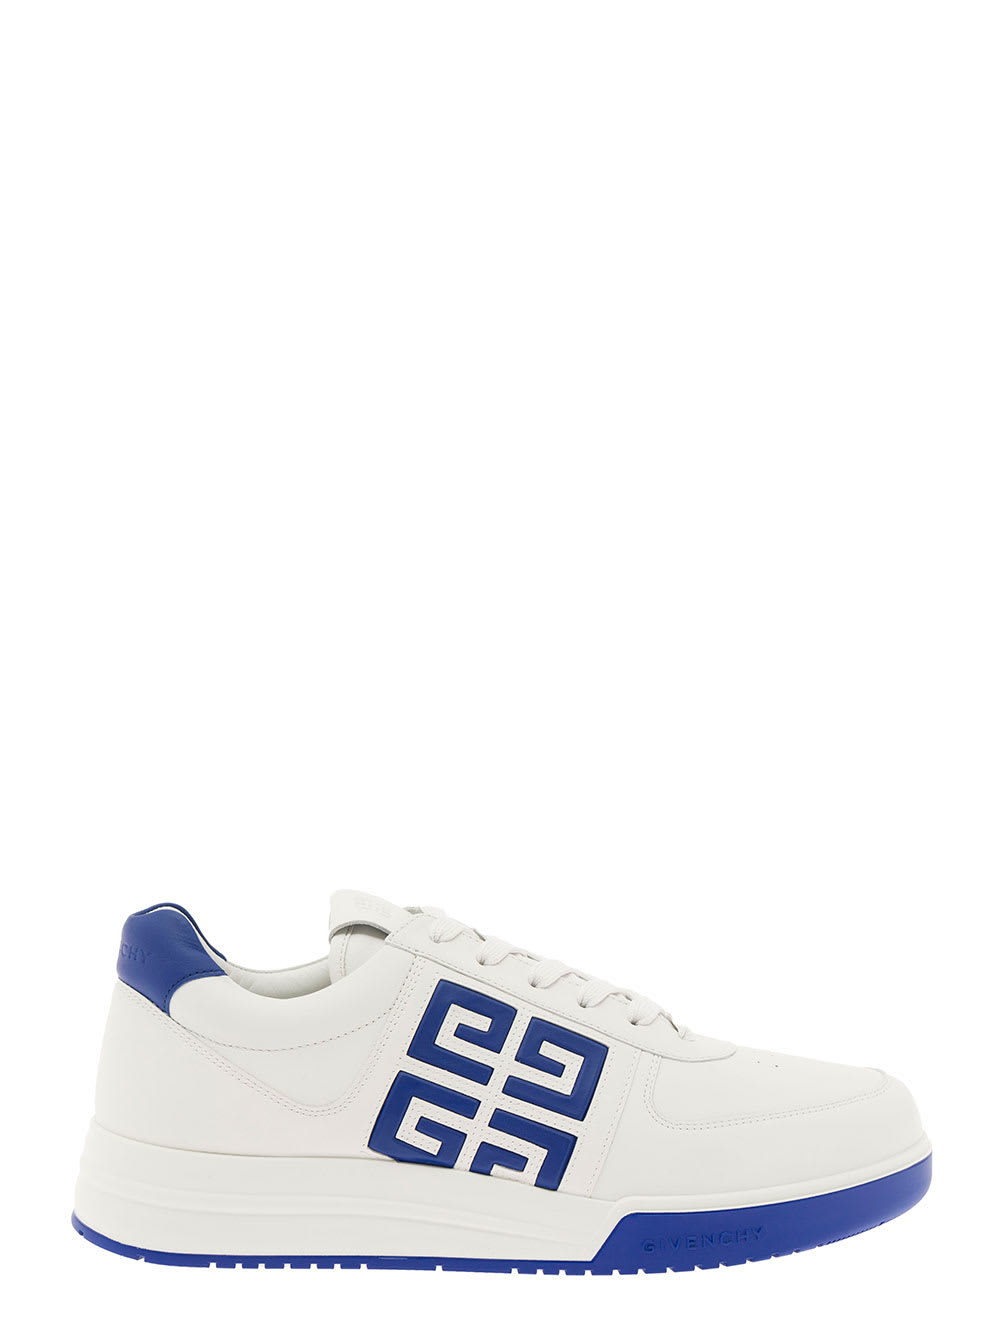 GIVENCHY G4 WHITE AND BLUE SNEAKERS WITH CONTRASTING HEEL TAB AND 4G LOGO IN LEATHER MAN